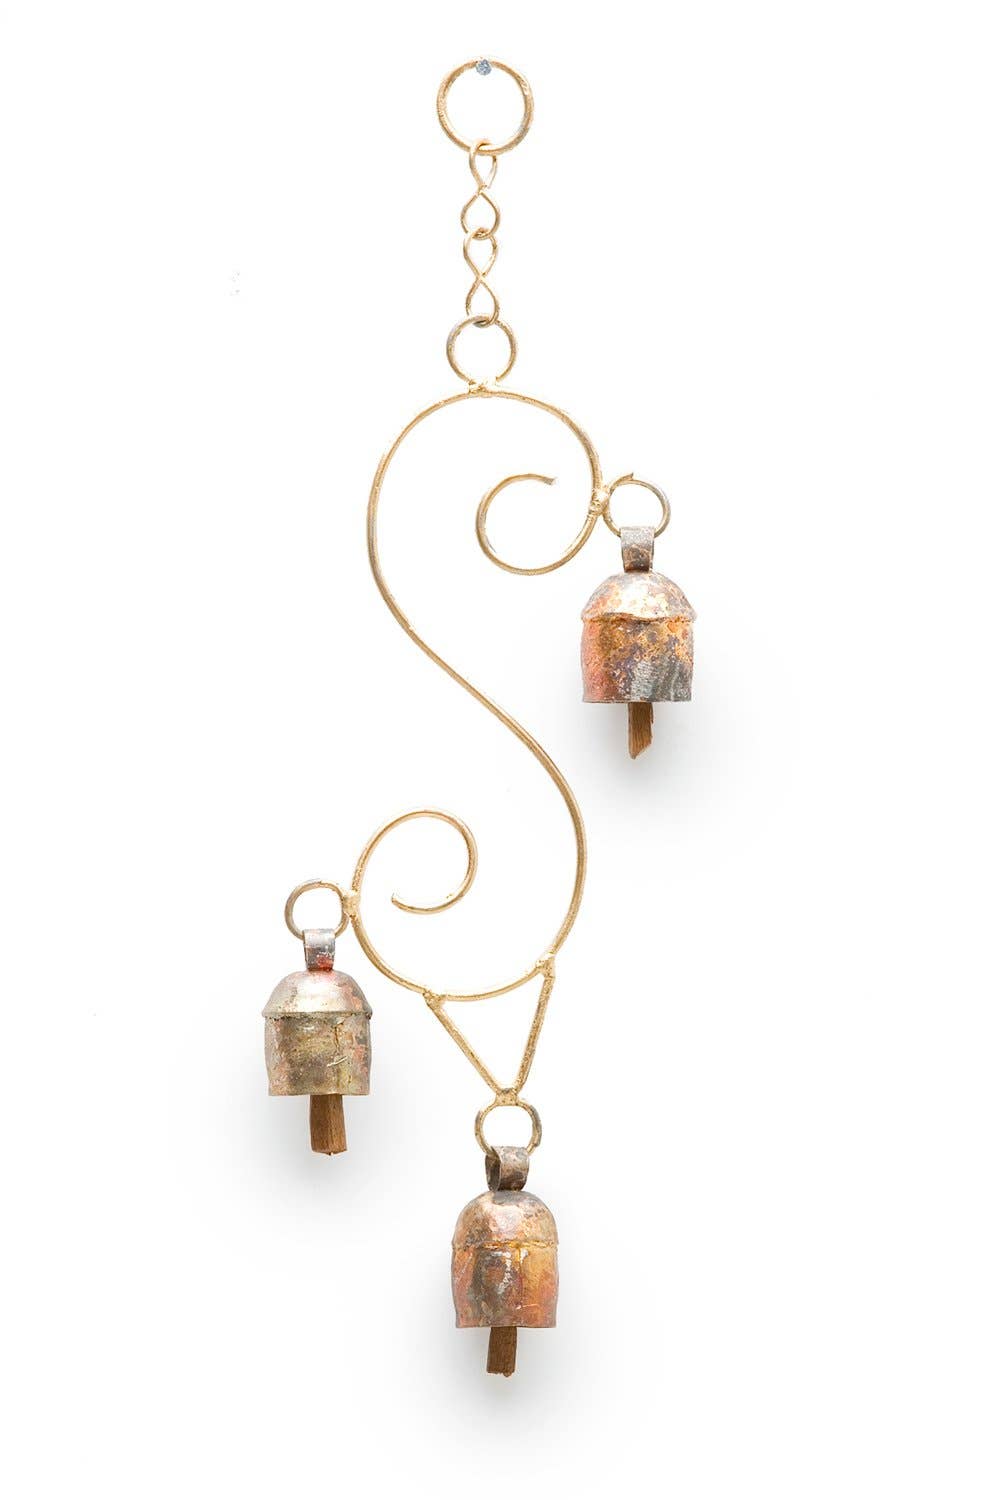 Curling Vine Chime, Small